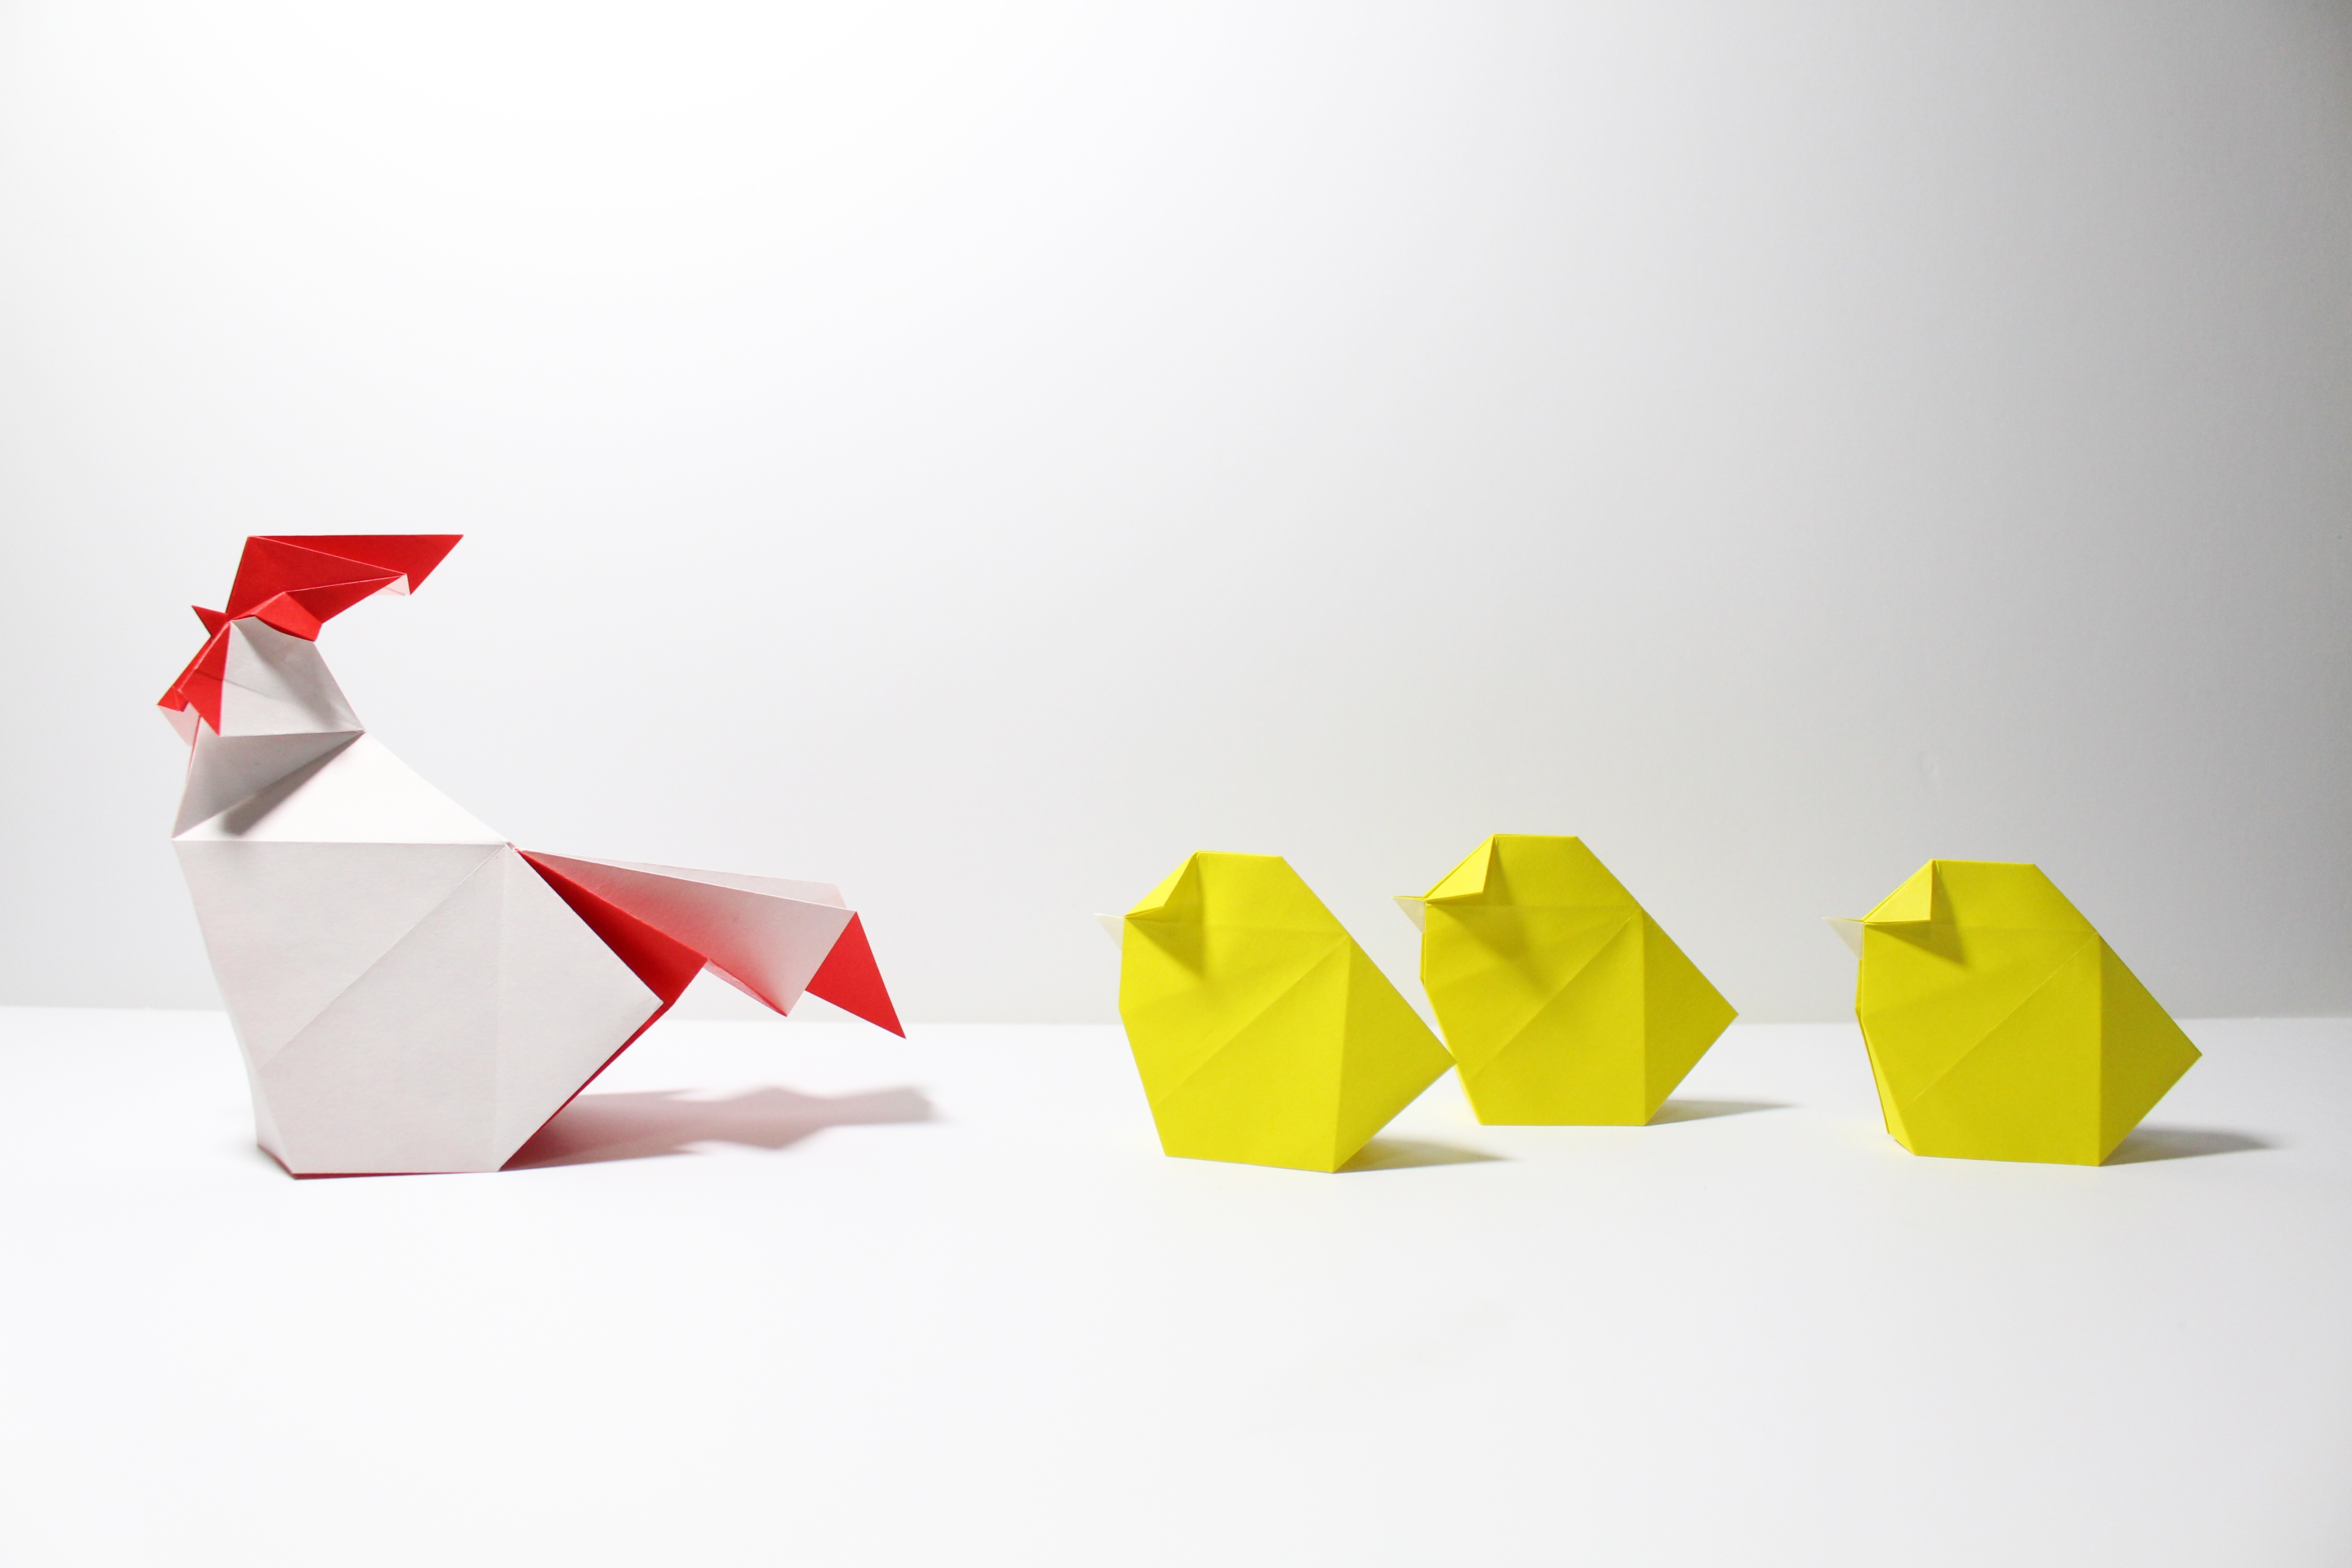 Man Made Origami HD Wallpaper | Background Image